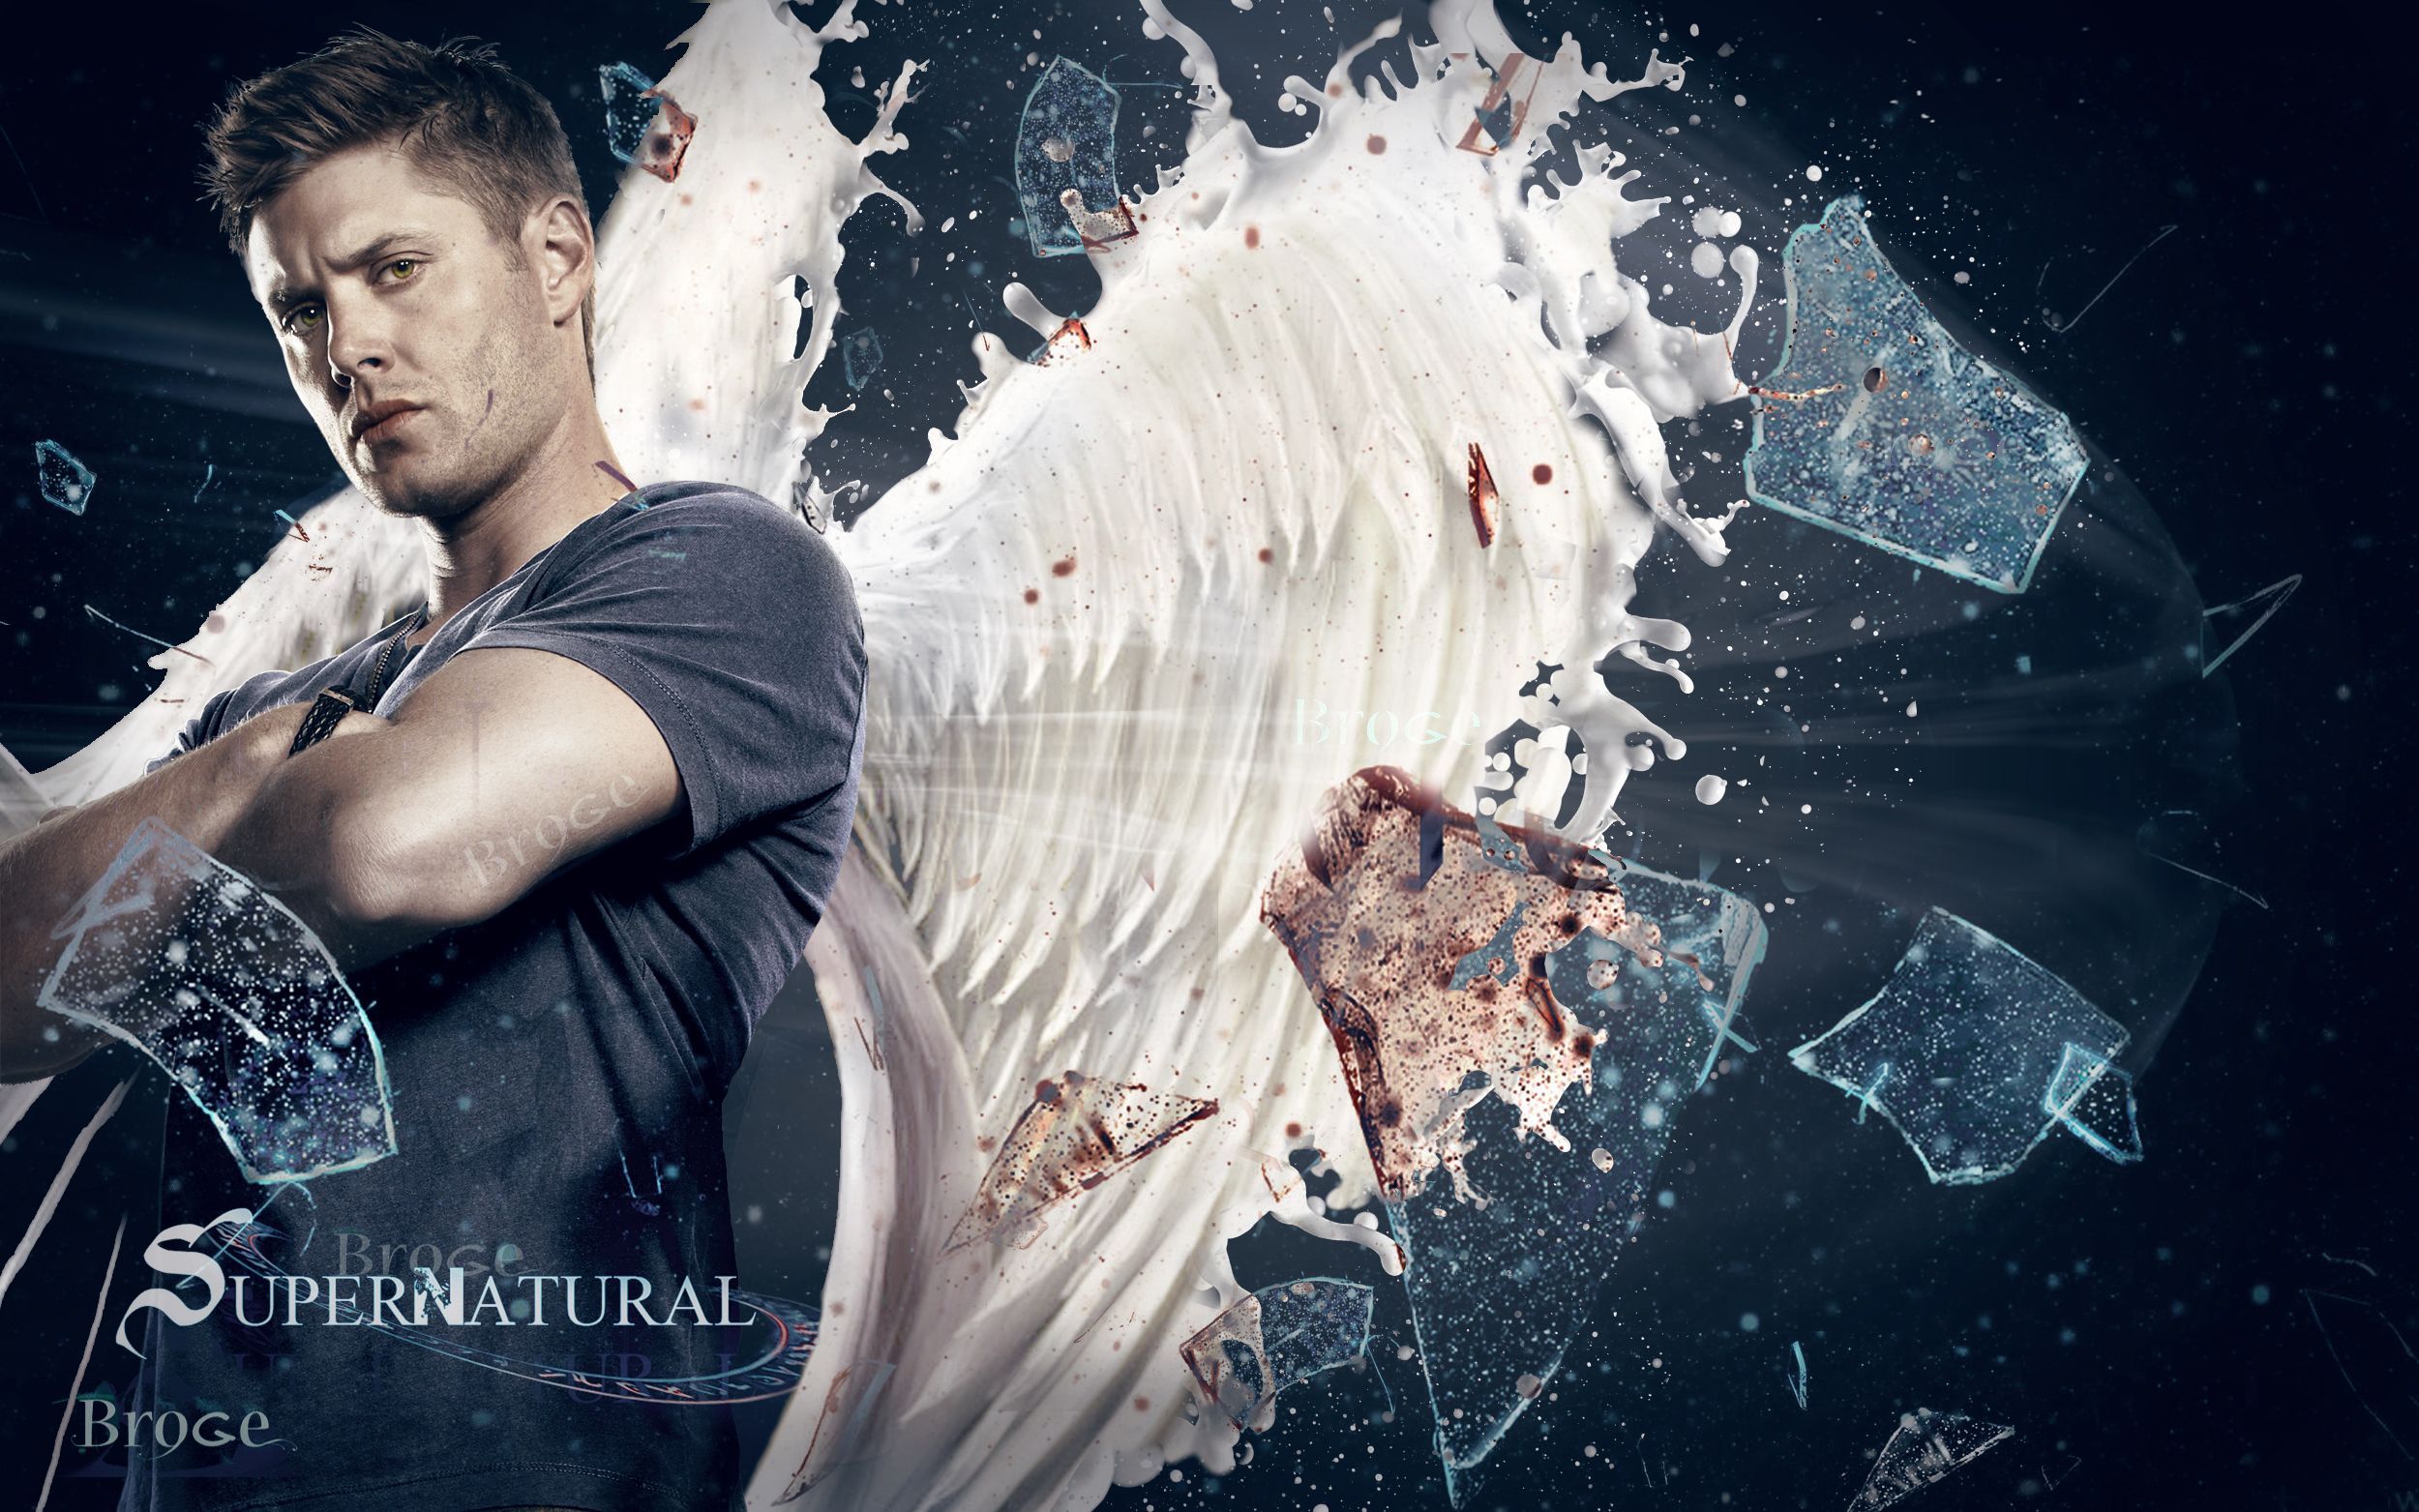 Download wallpaper from tv series Supernatural with tags: Computer, Supernatural, Dean Winchester, Jensen Ackles